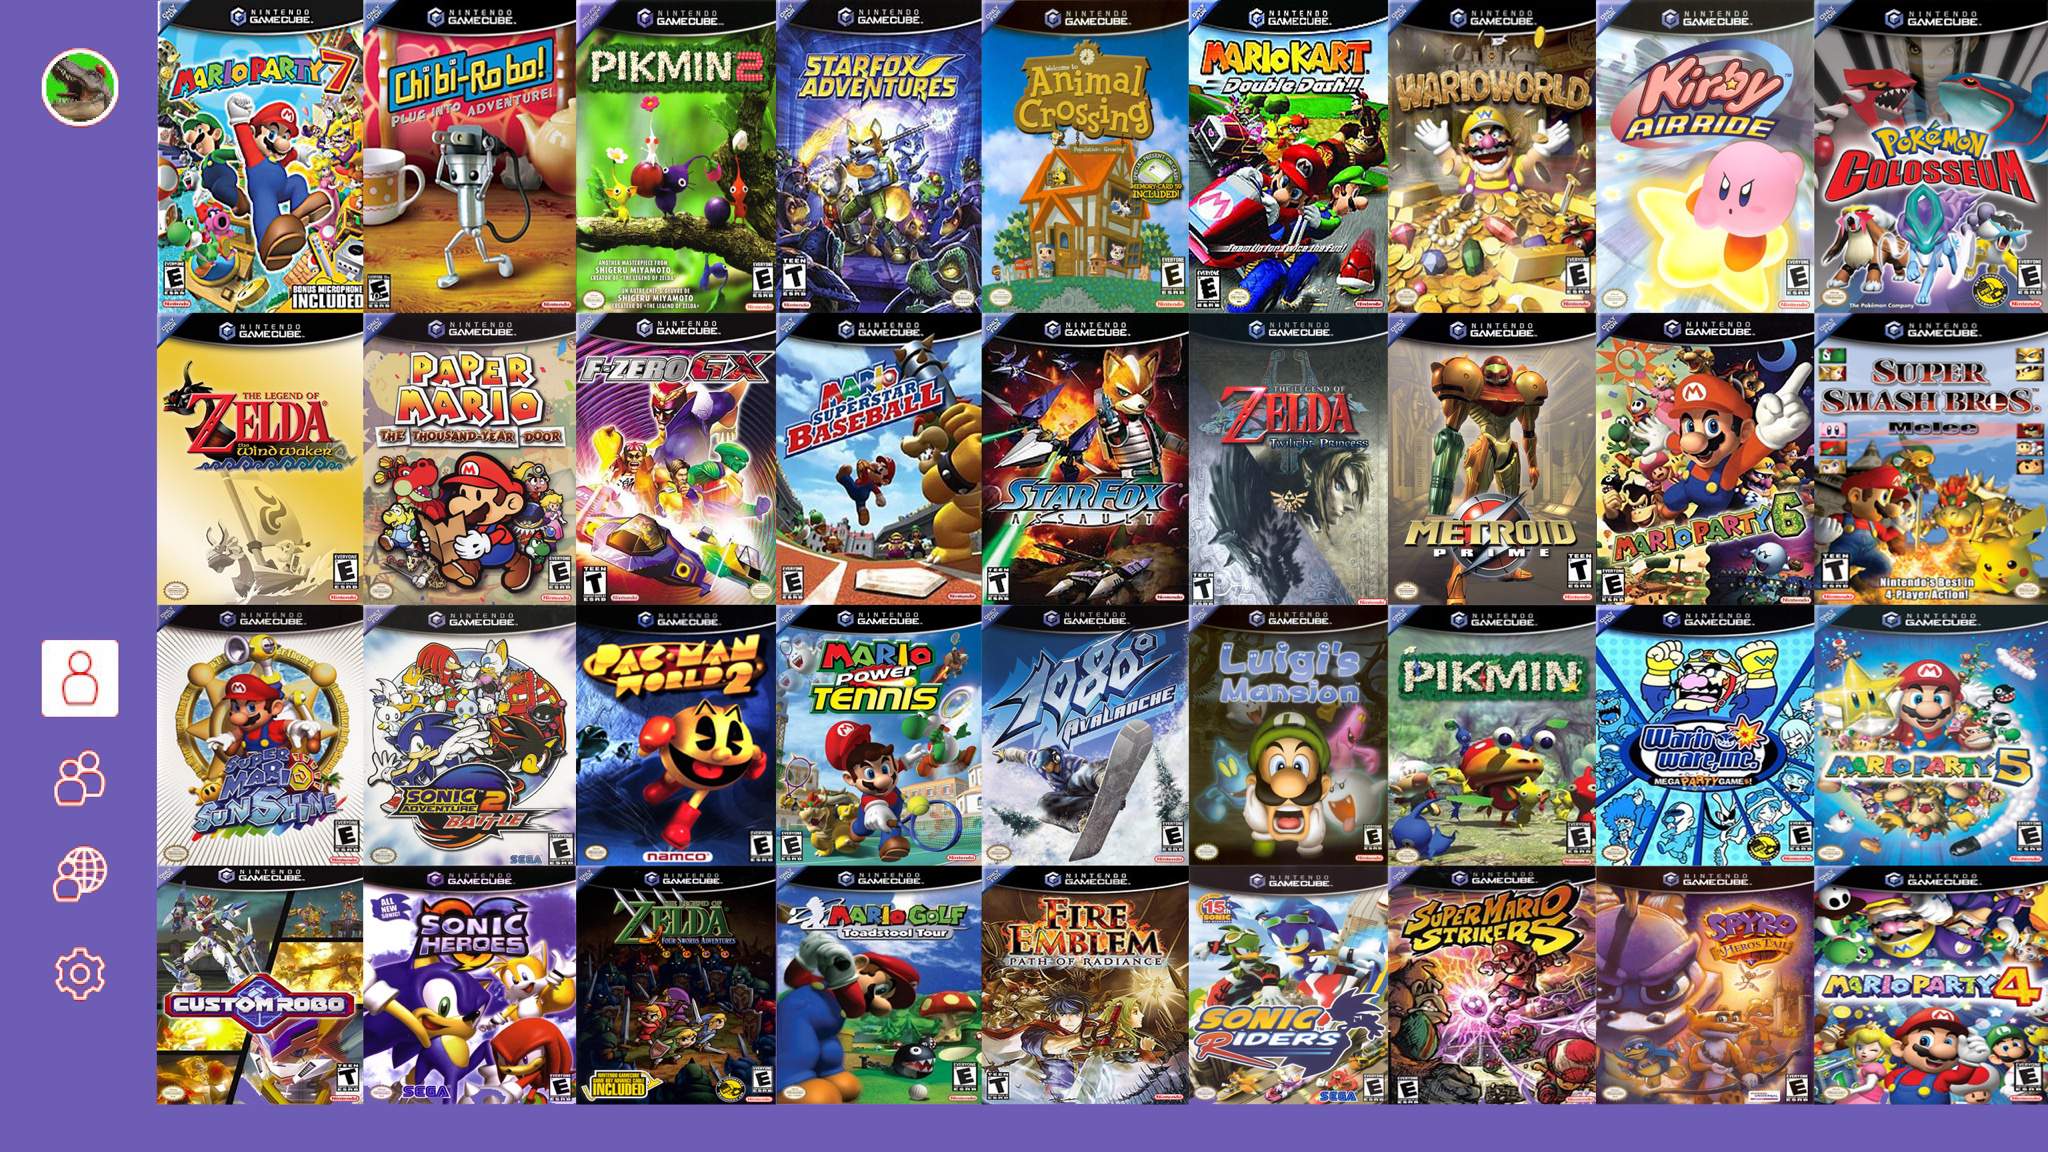 gamecube games for switch